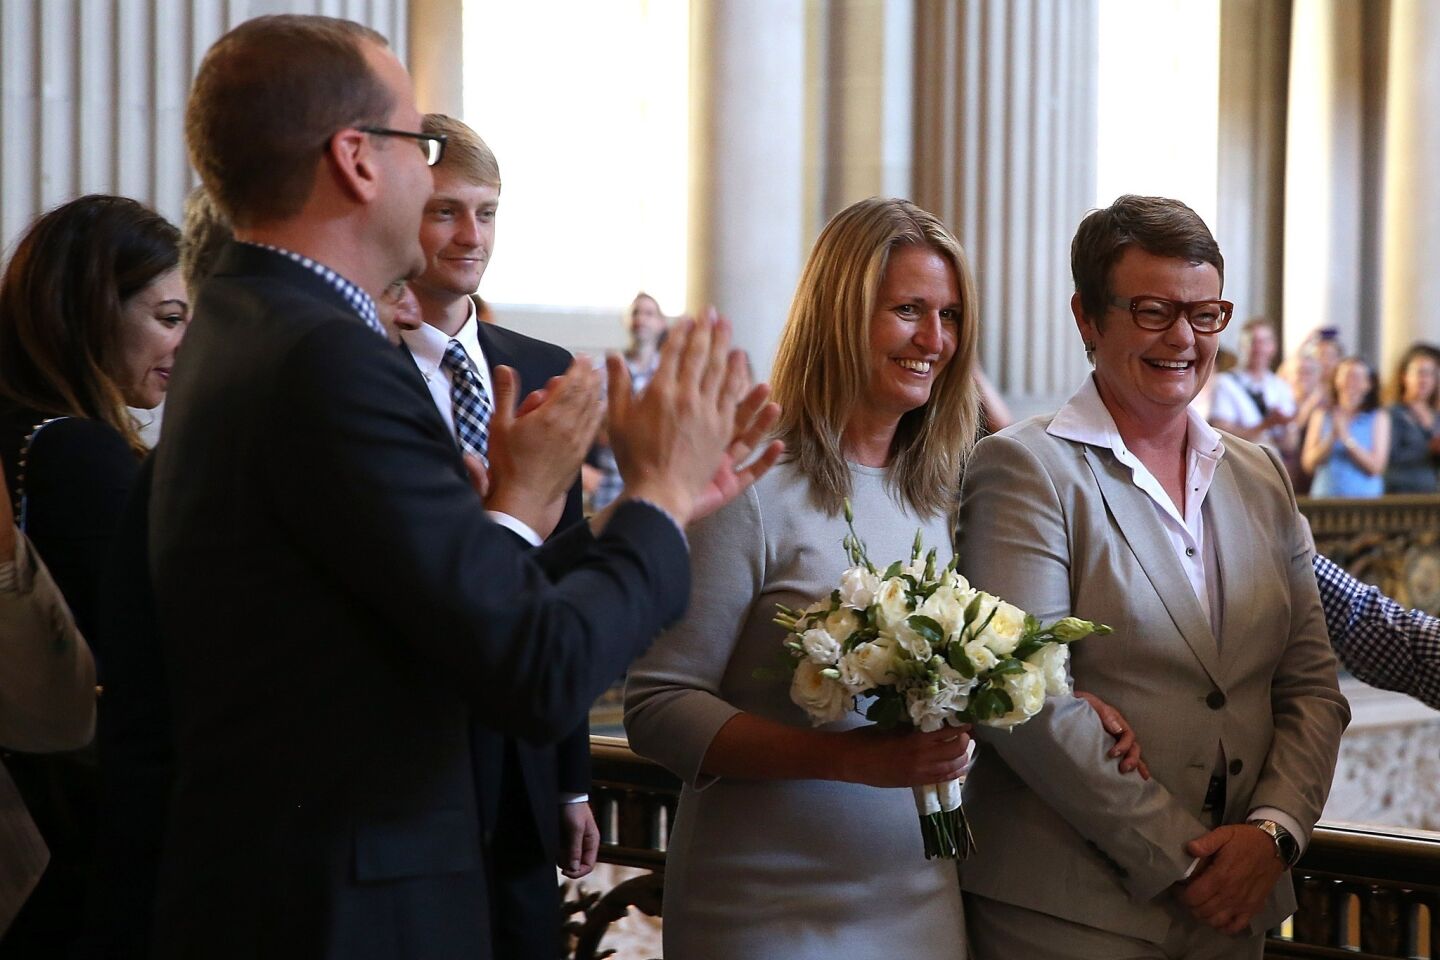 Supporters applaud as Sandy Stier, second from right, and Kris Perry prepare to get married at San Francisco City Hall by California Atty. Gen. Kamala Harris. Gov. Jerry Brown ordered all counties in the state to begin issuing licenses immediately after the 9th Circuit Court ruling.